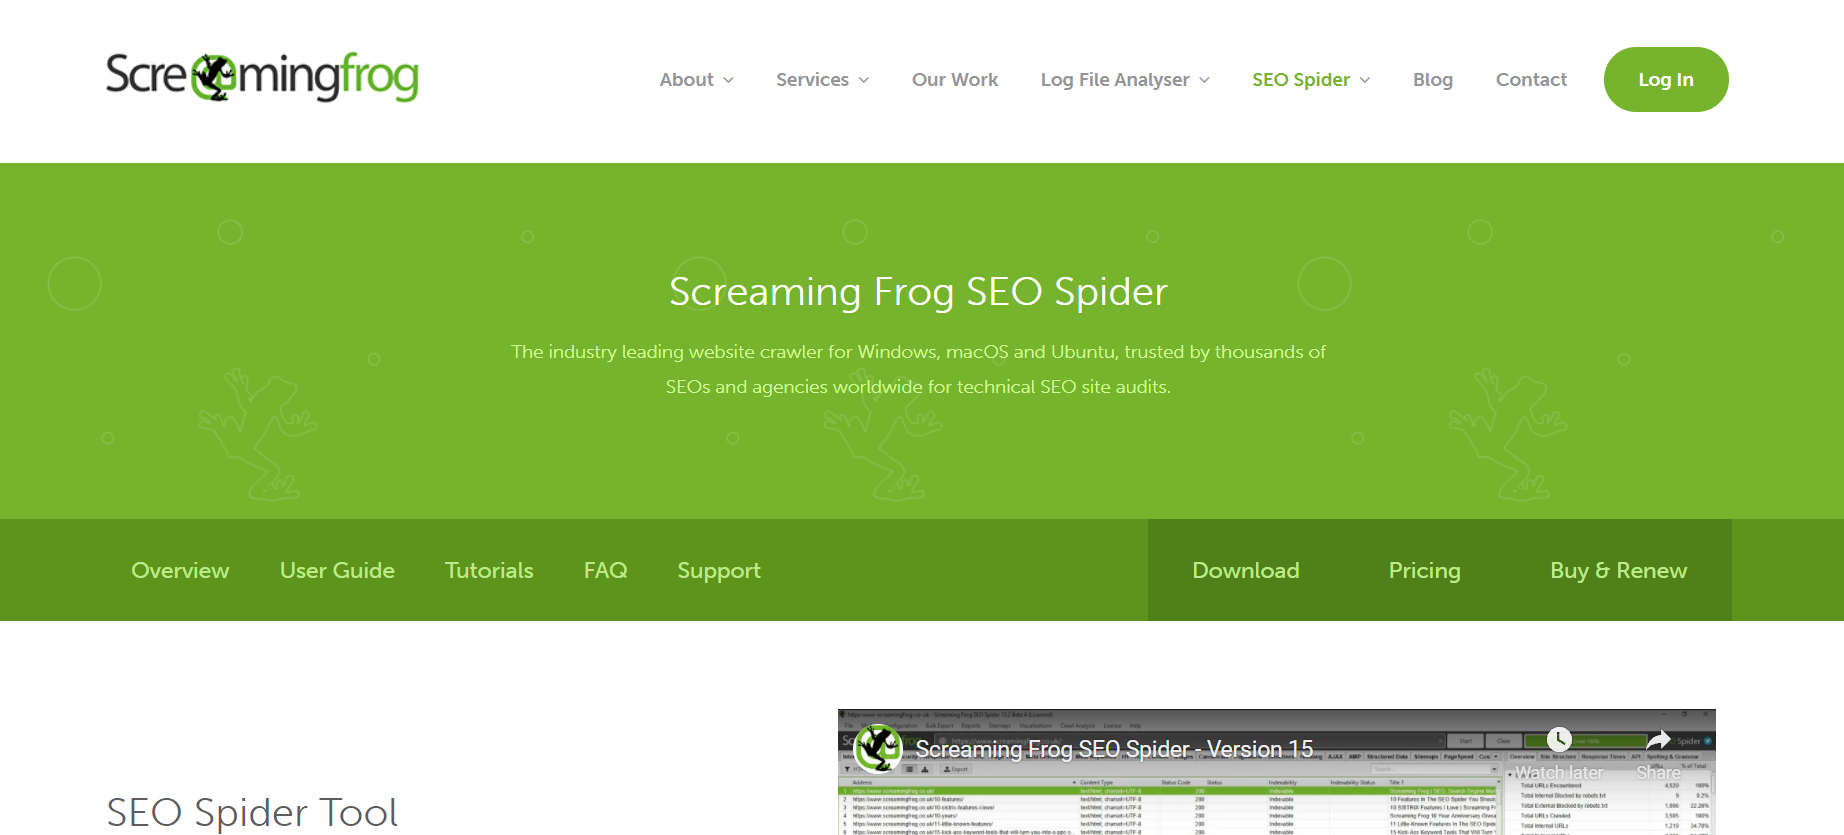 SEO Spider - Tool For Planning A Website Development